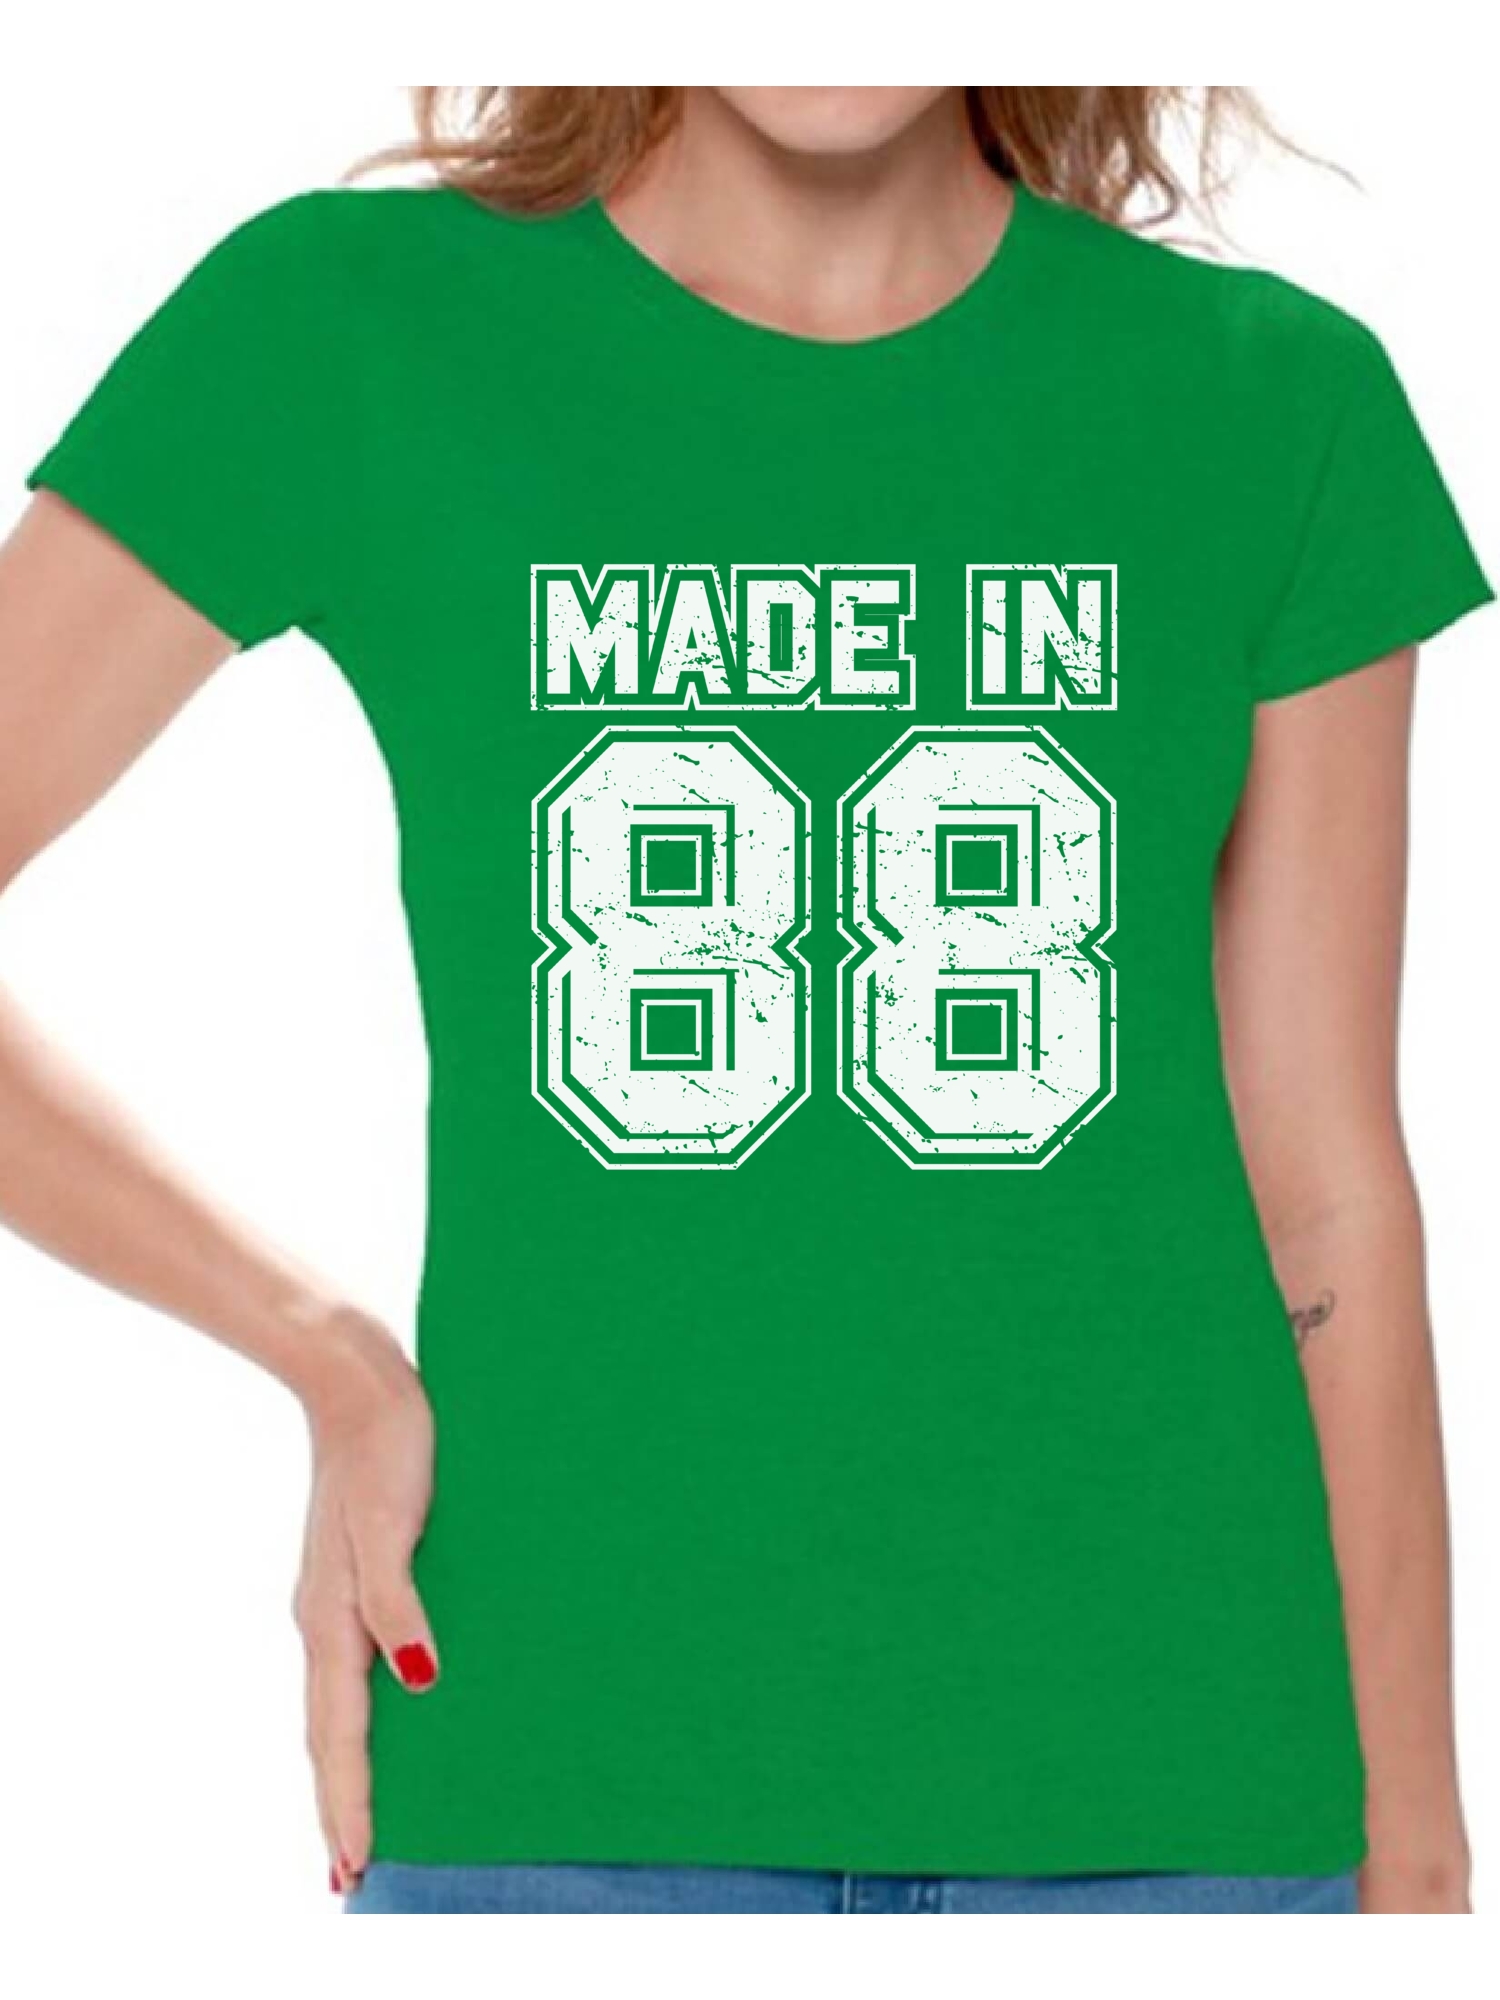 Awkward Styles Made In 88 Tshirt 30th Birthday Party Outfit for Women Born in 1988 Funny Birthday Shirts for Women 30th Birthday Shirt Funny Thirty Shirts Womens 30th Tshirt B-Day Party 88 T-Shirt - image 1 of 4